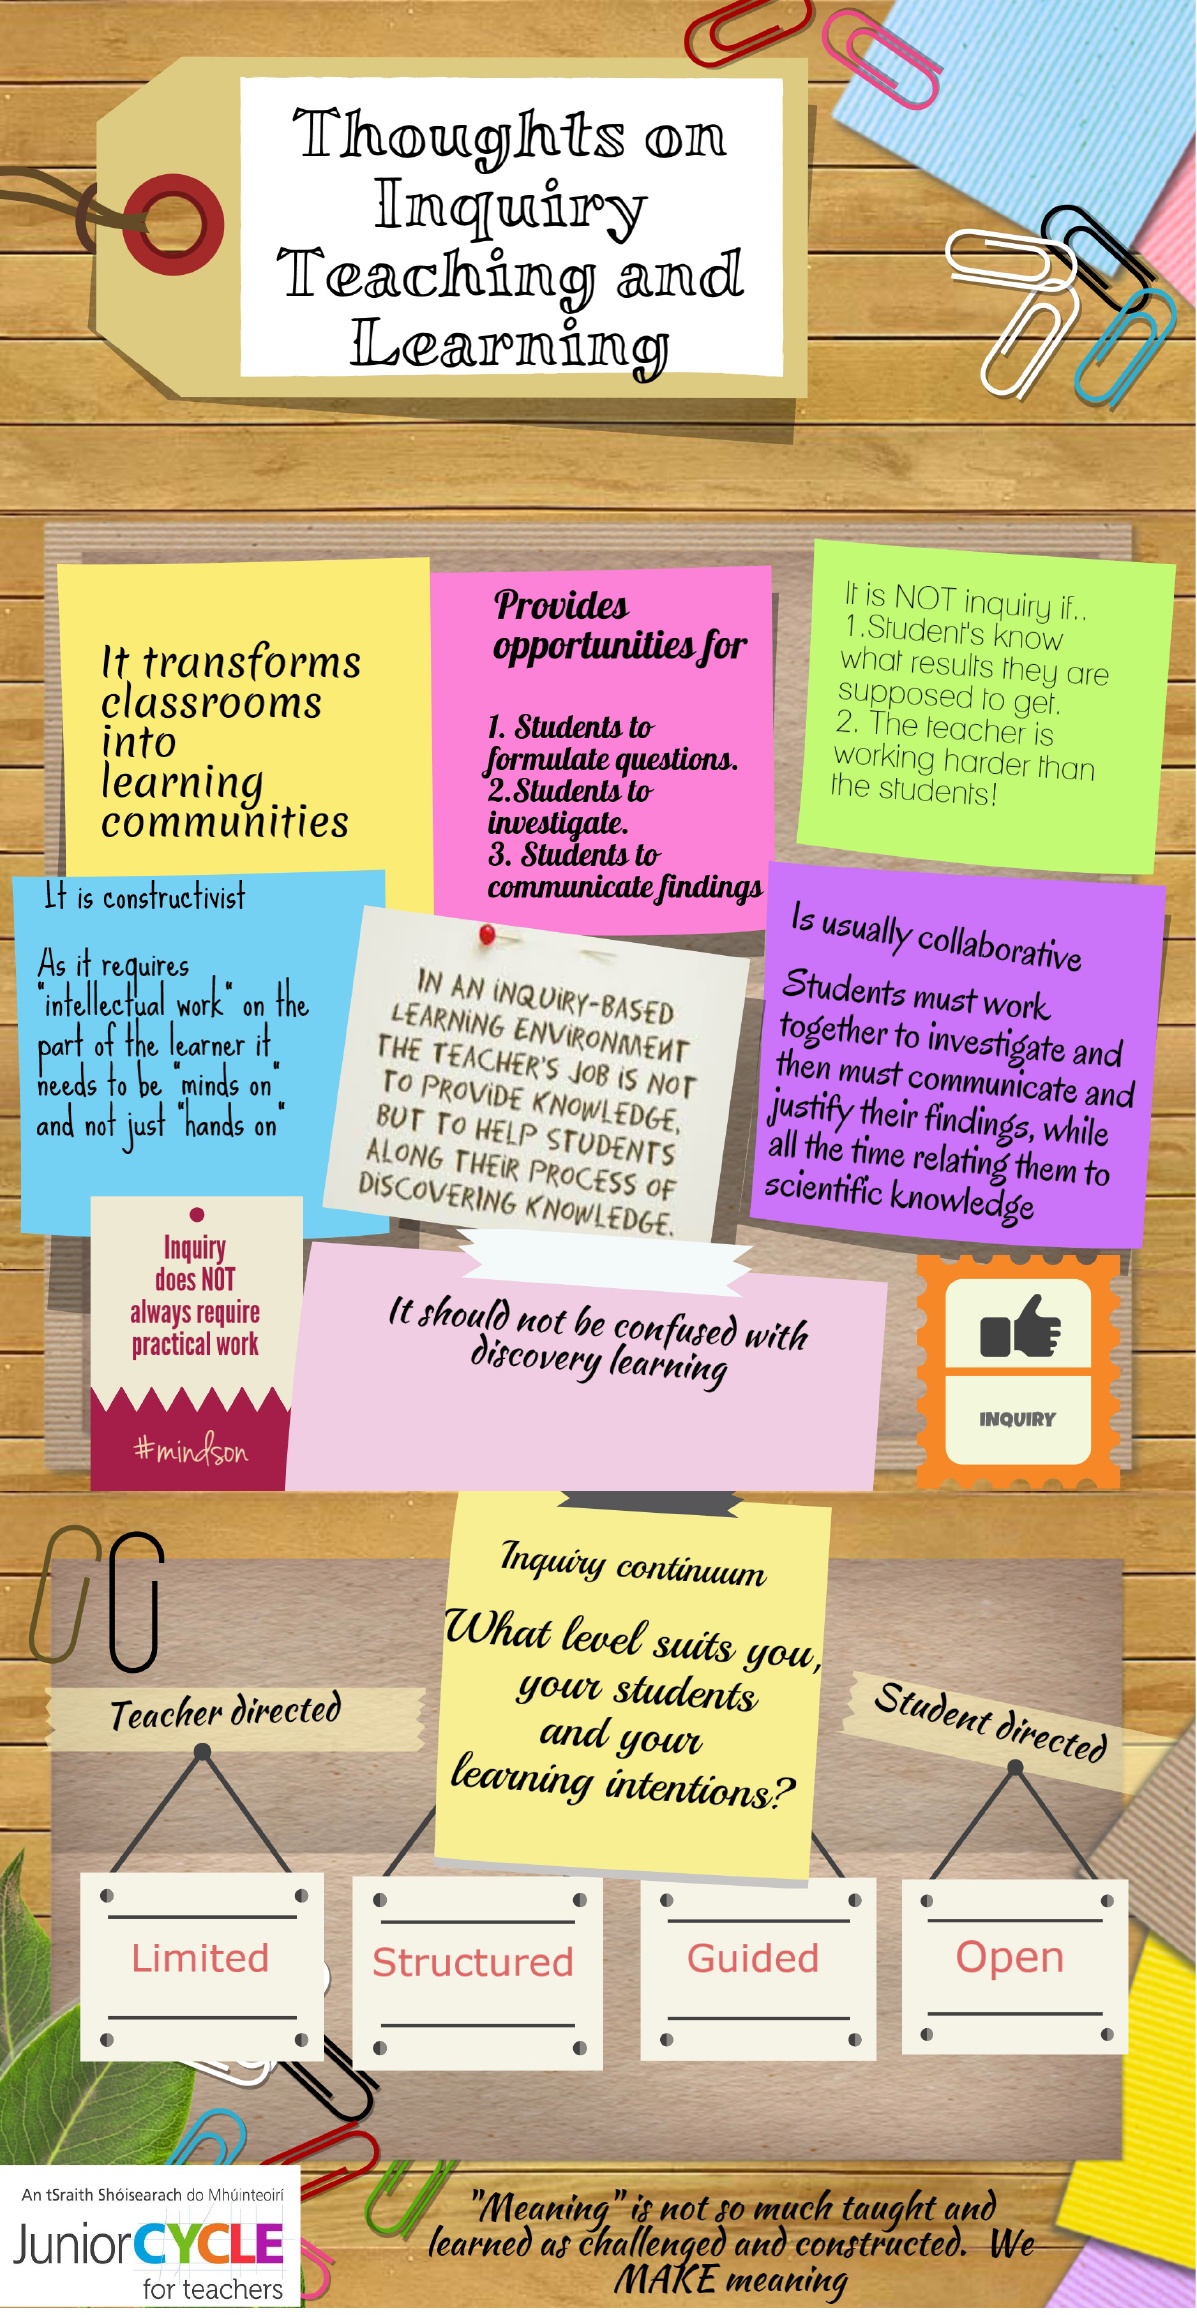 Thoughts on Inquiry Teaching and Learning - Infographic